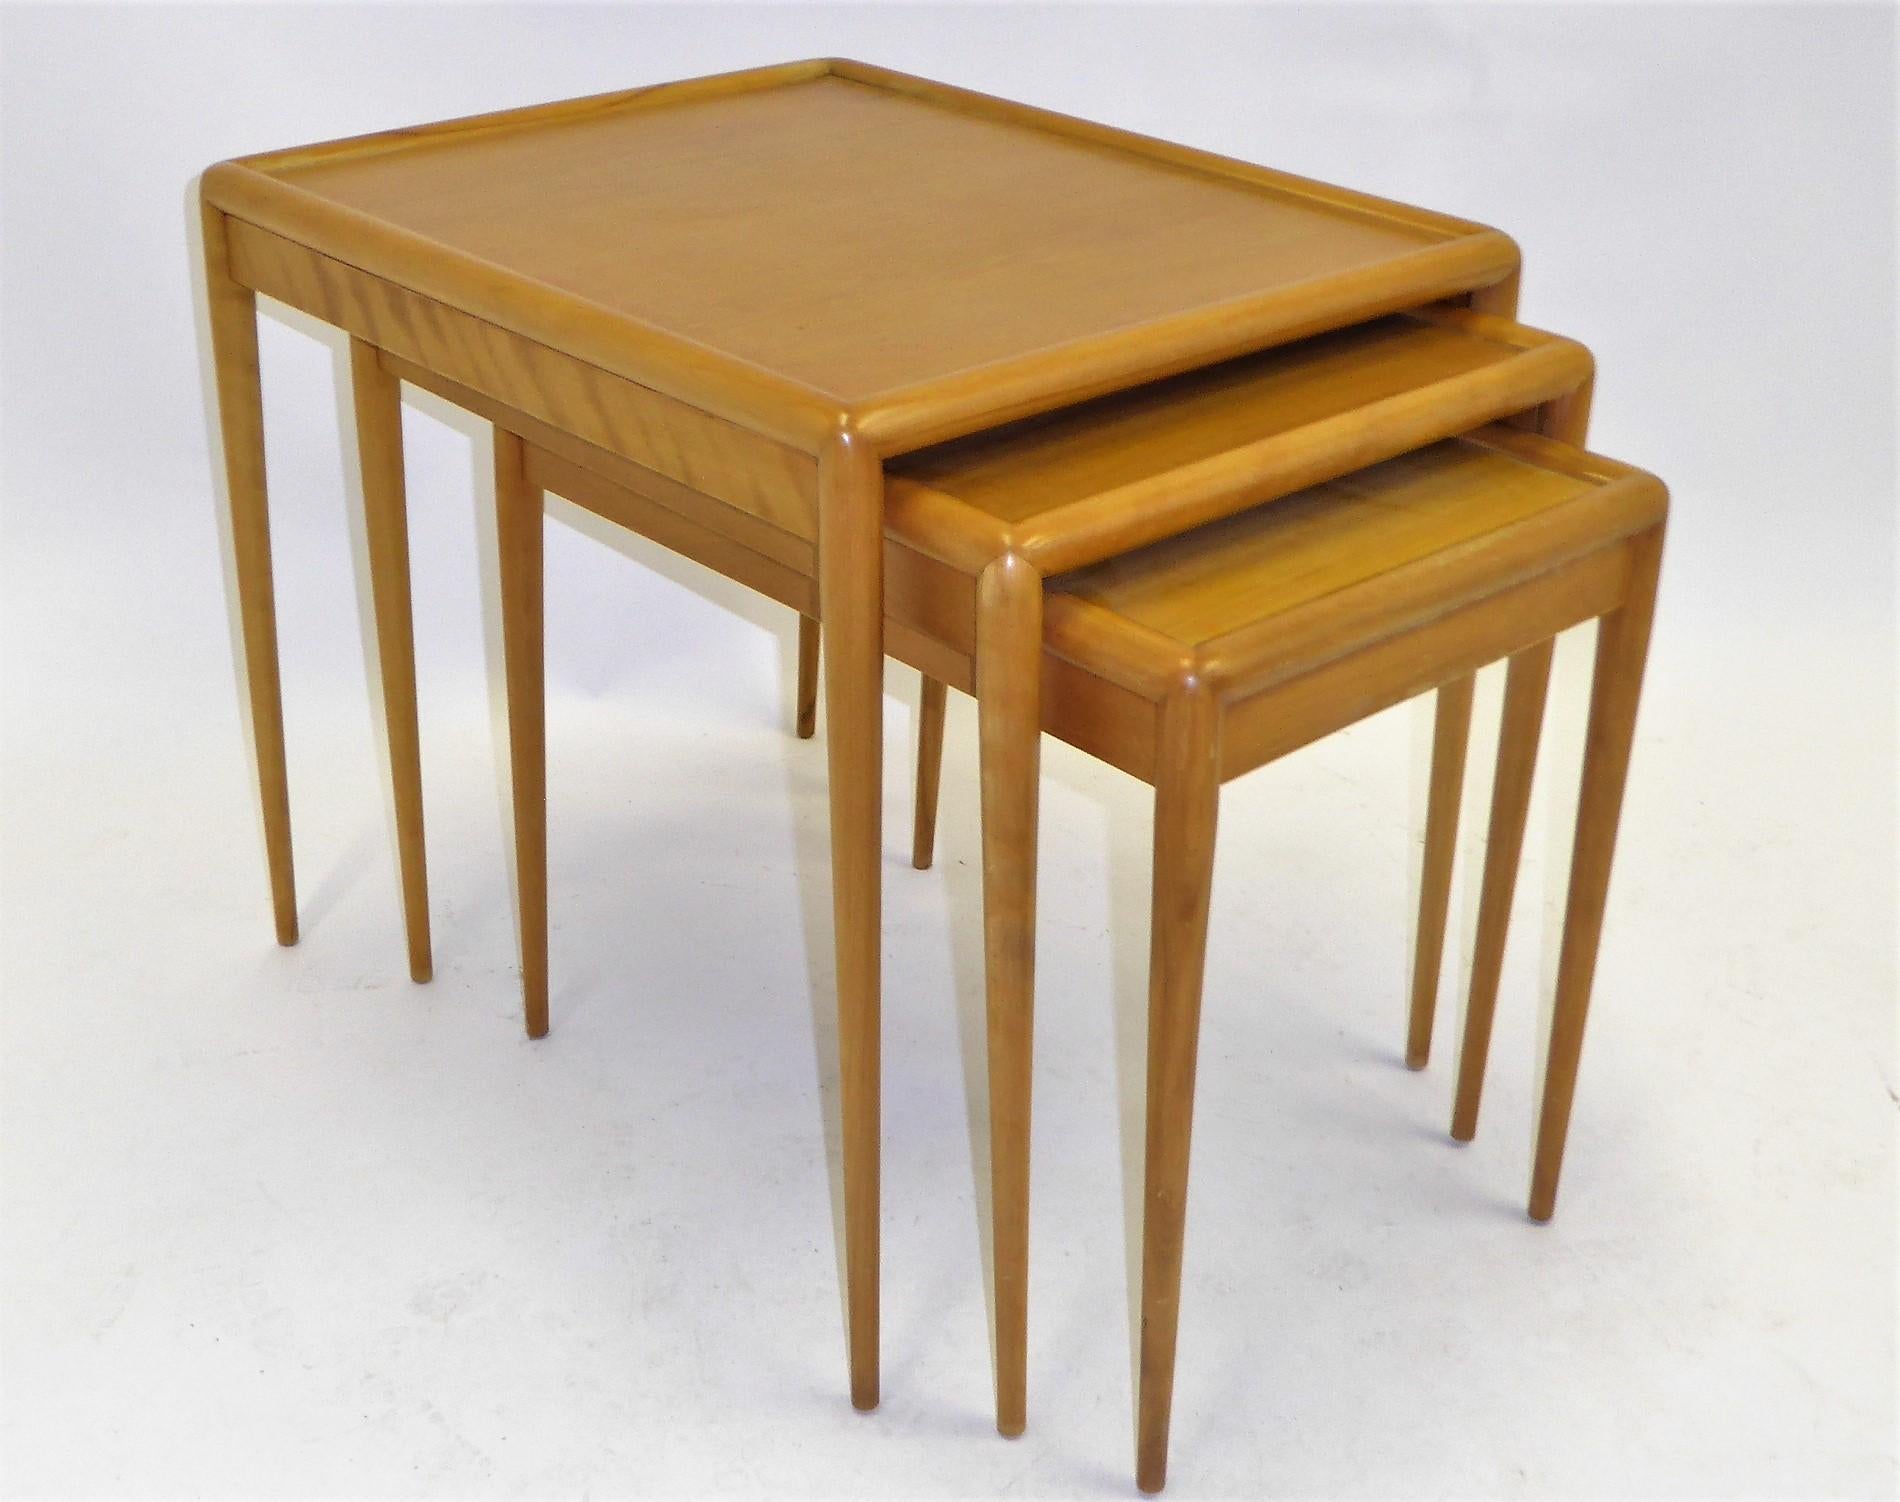 REDUCED FROM $3,250....Mid Century Modern super set of three matching nesting / stacking tables by T.H. Robsjohn-Gibbings for Widdicomb model no. 1783. In very good condition. Slight wear, see pics. Beautiful blond figured walnut in sorrel finish,